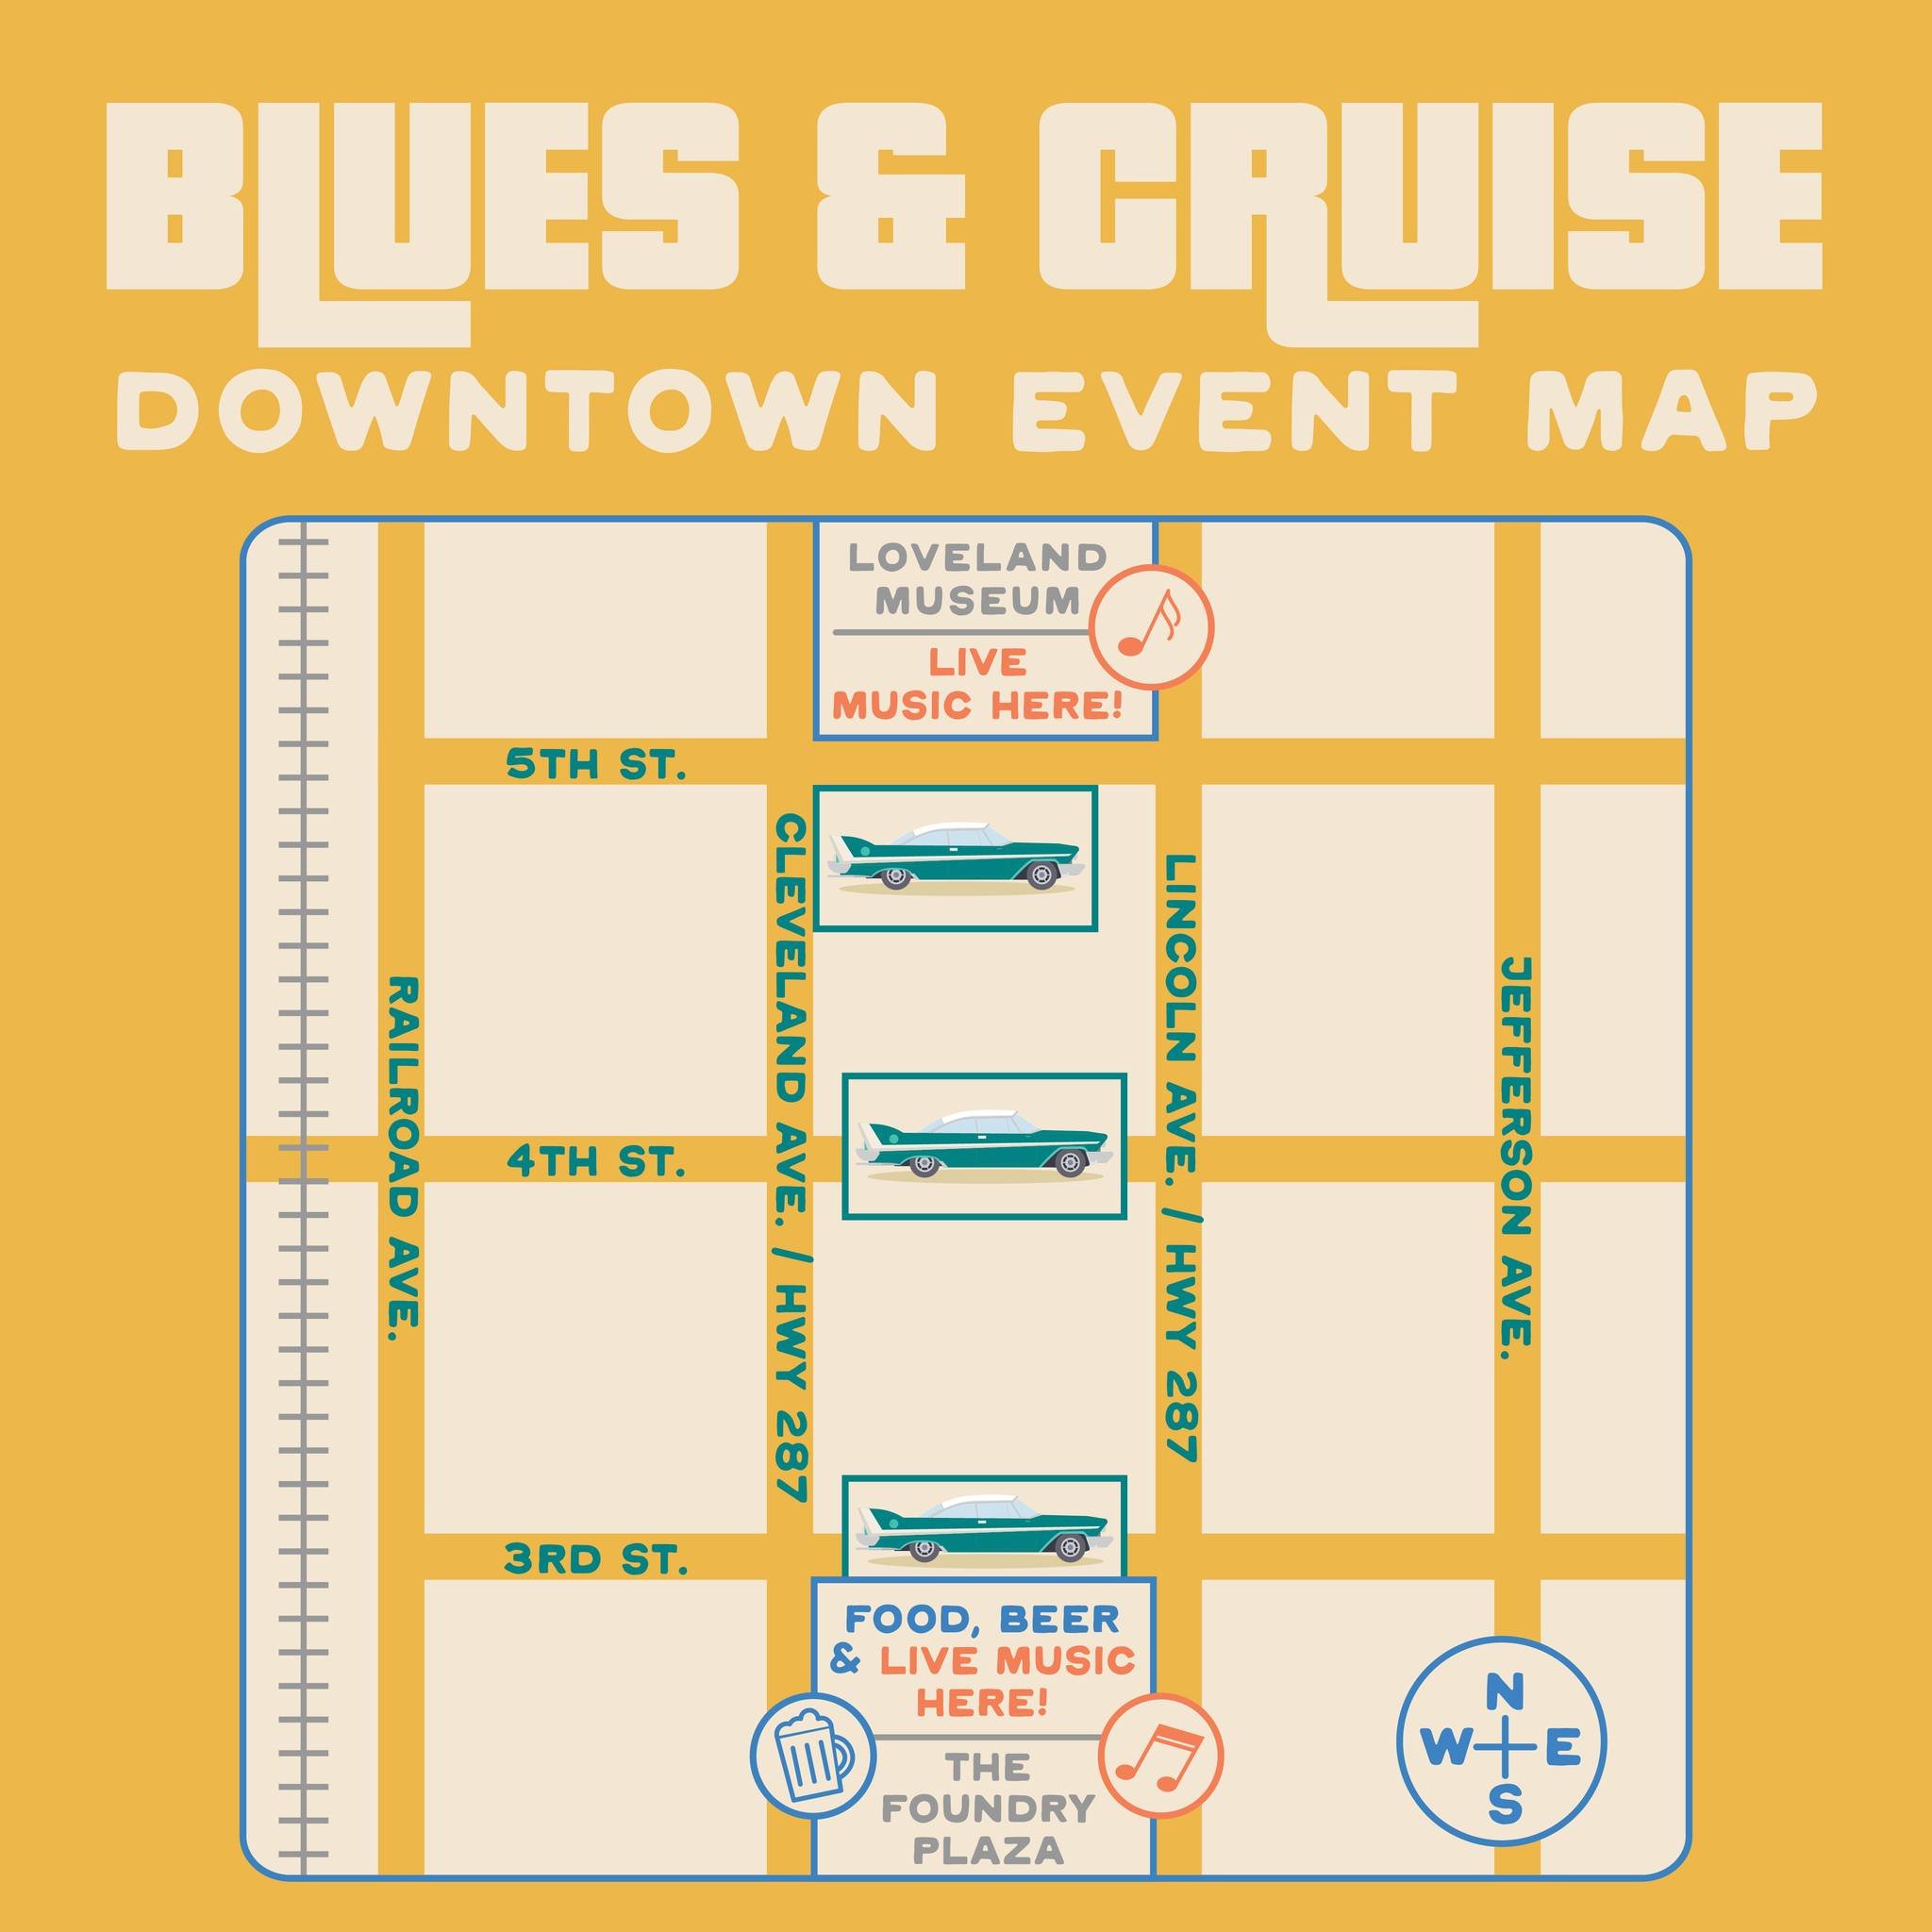 Calling all music aficionados and car enthusiasts! Don't miss our Blues &amp; Cruise Car Show. This event is where soulful tunes meet timeless automobiles. Free to the public! Saturday, May 18th  from 10:00am-4:00pm. Downtown Loveland
Visit our websi